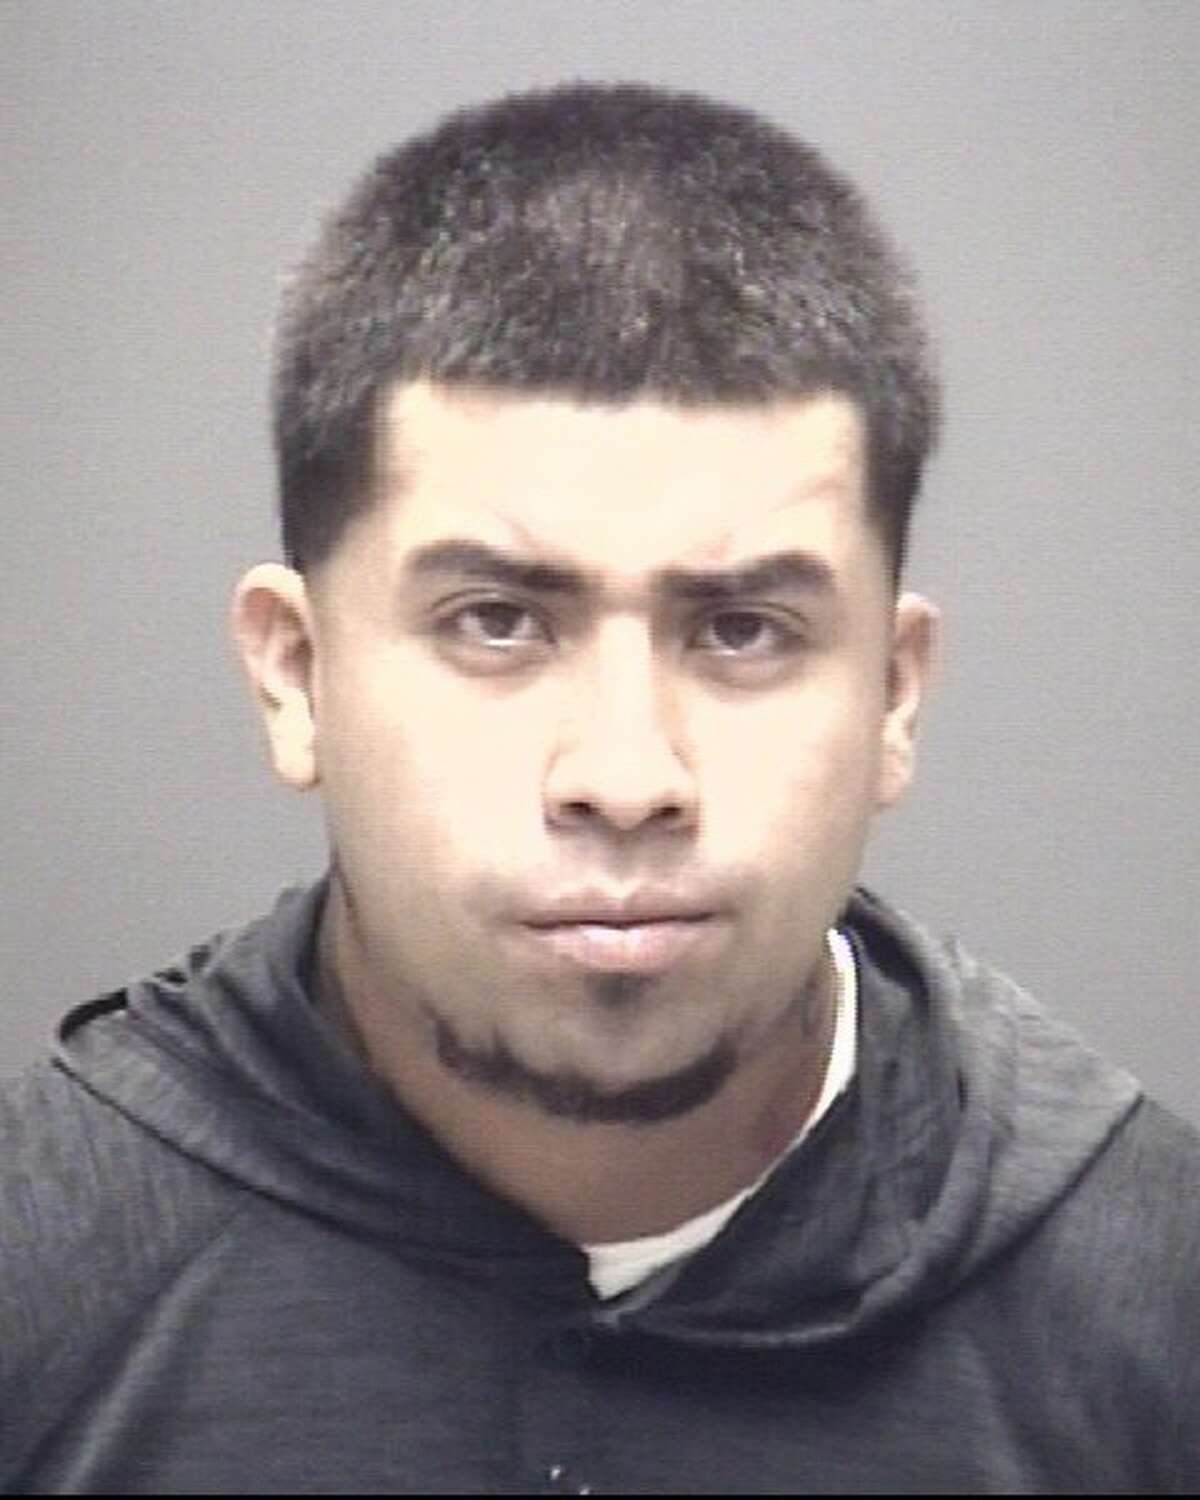 Ornaldo Martinez, 23, was arrested by Galveston County Sheriff Deputies on Wednesday, Aug. 2 and remains in custody on an $80,000 bond.  He is charged with manslaughter in connection with the alleged accidental shooting of his 18 year-old girlfriend on Sunday, July 31. 